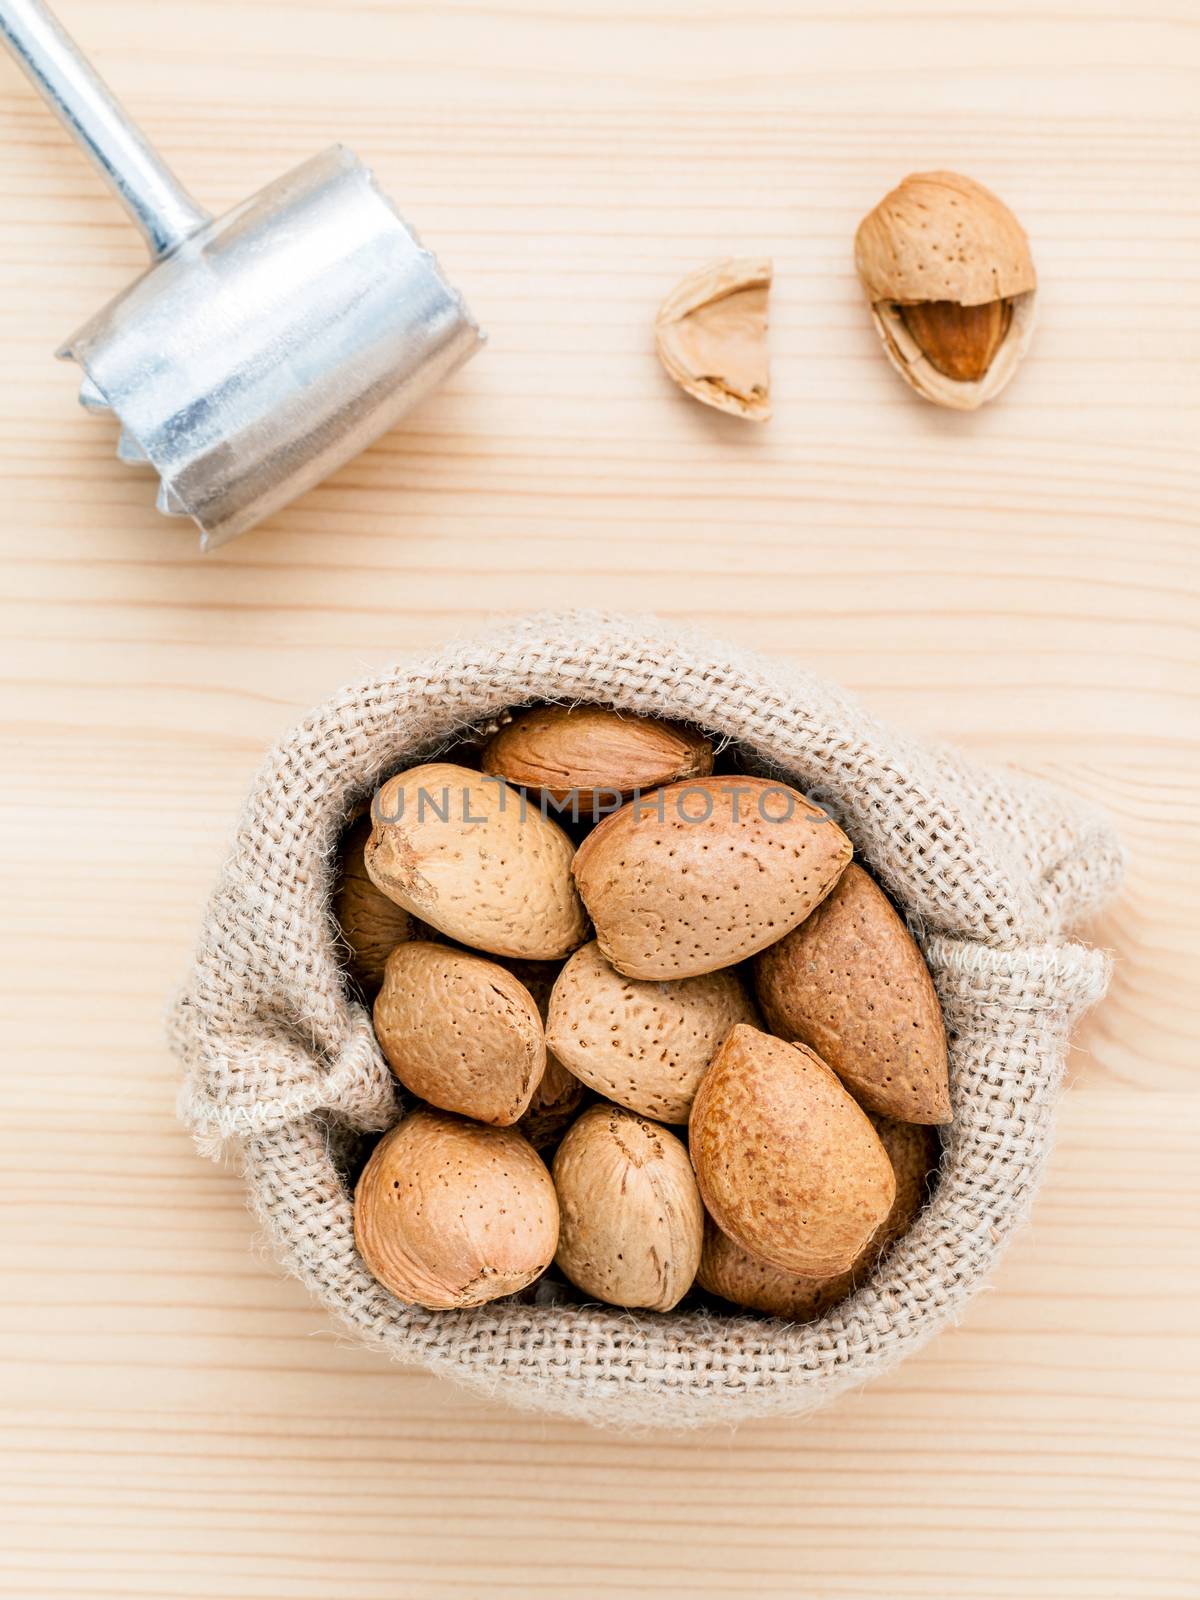 Almonds kernels and whole almonds on wooden background. Whole an by kerdkanno